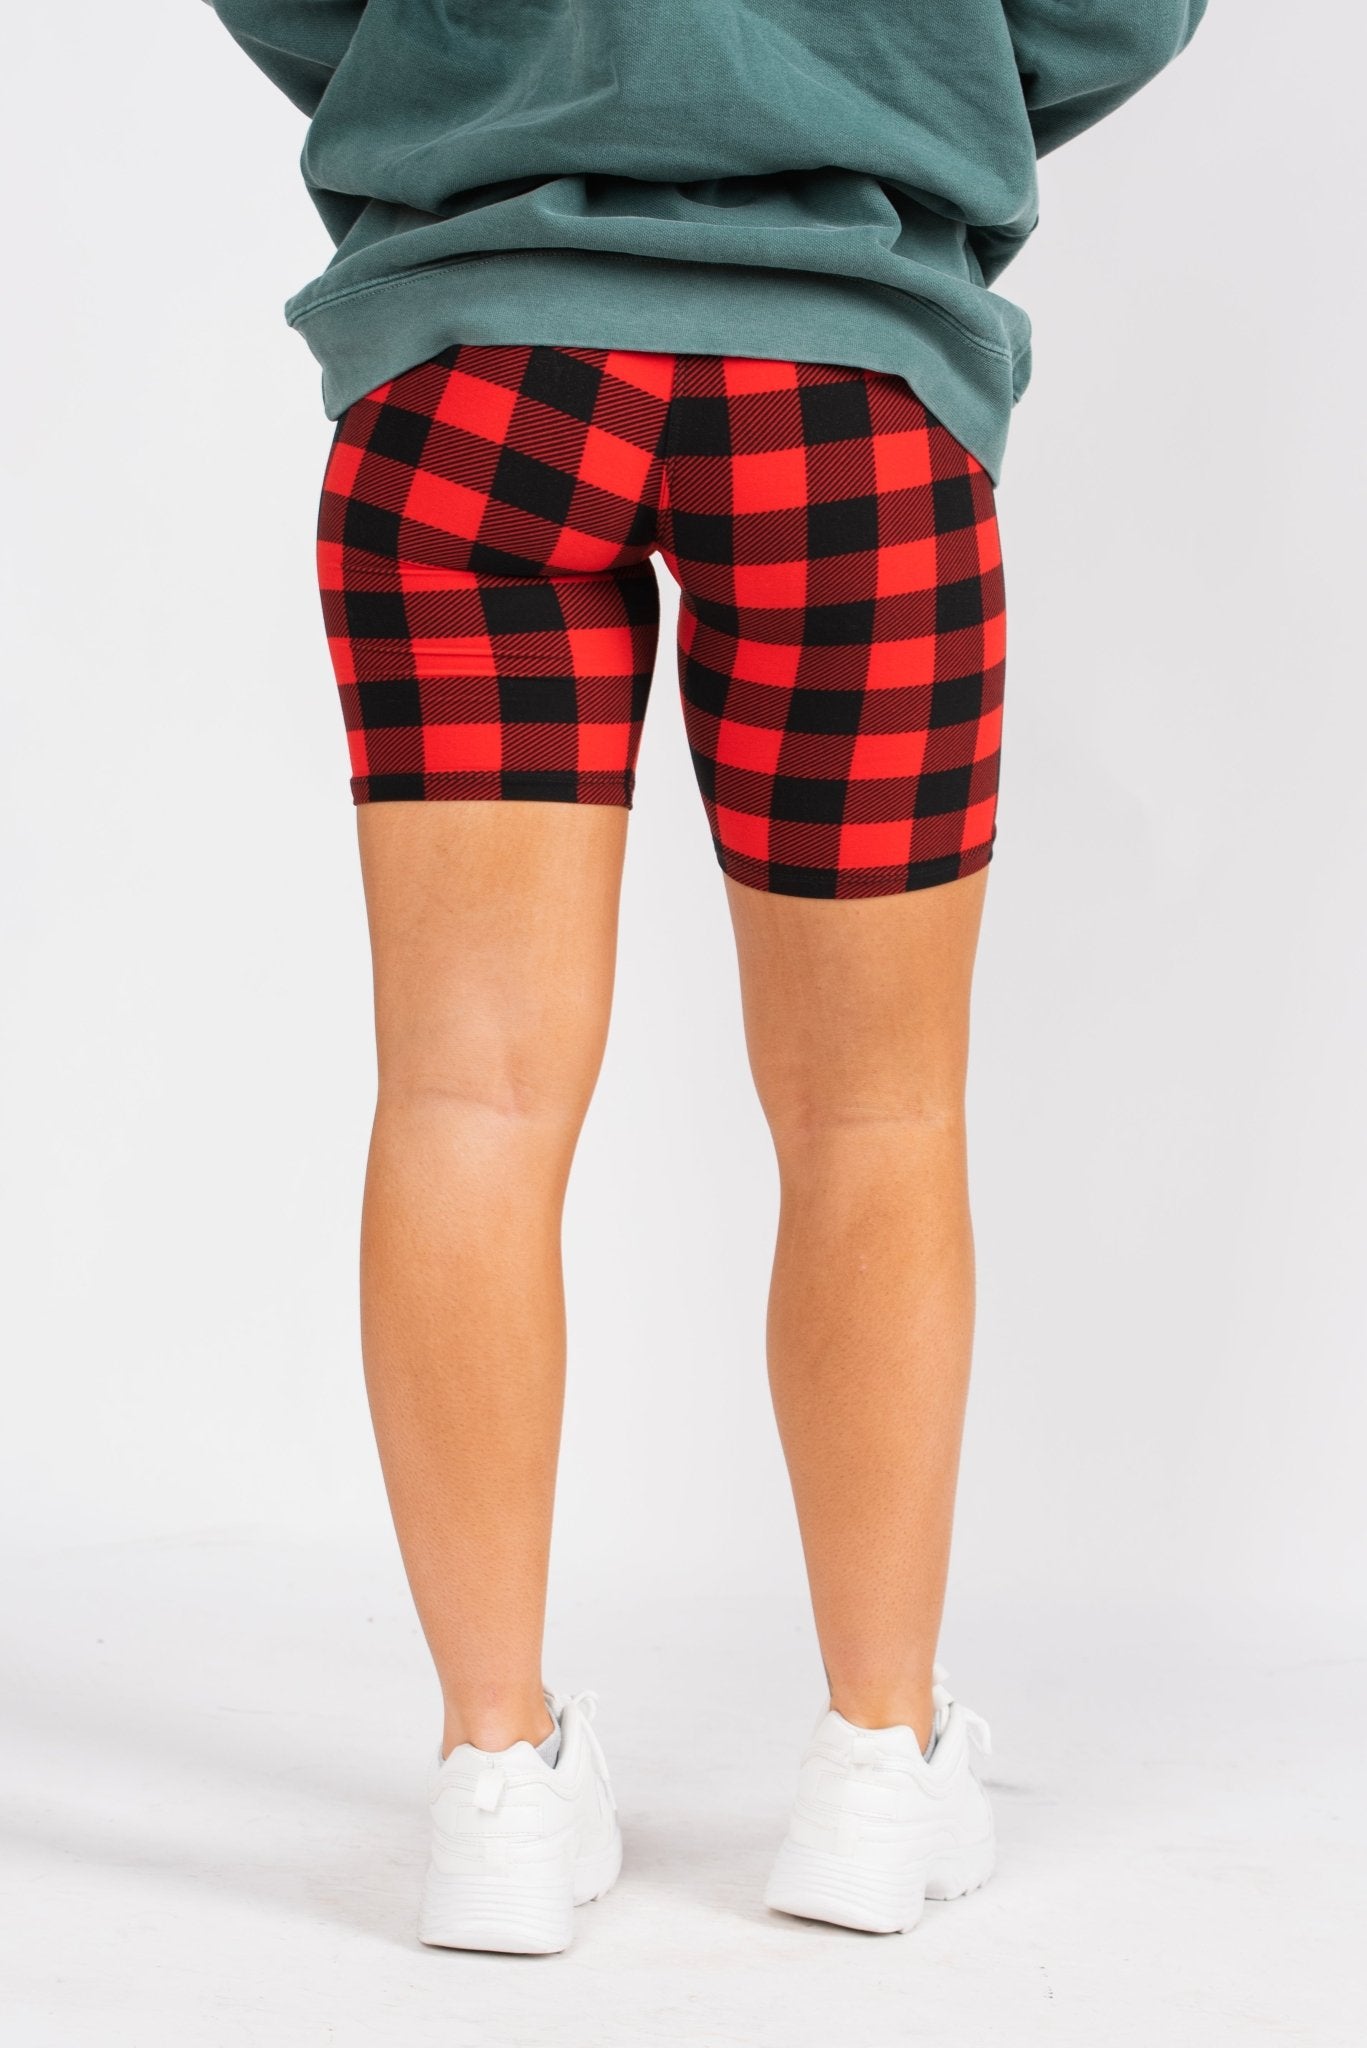 Gingham printed biker shorts red/black - Trendy Christmas Outfits at Lush Fashion Lounge Boutique in Oklahoma City